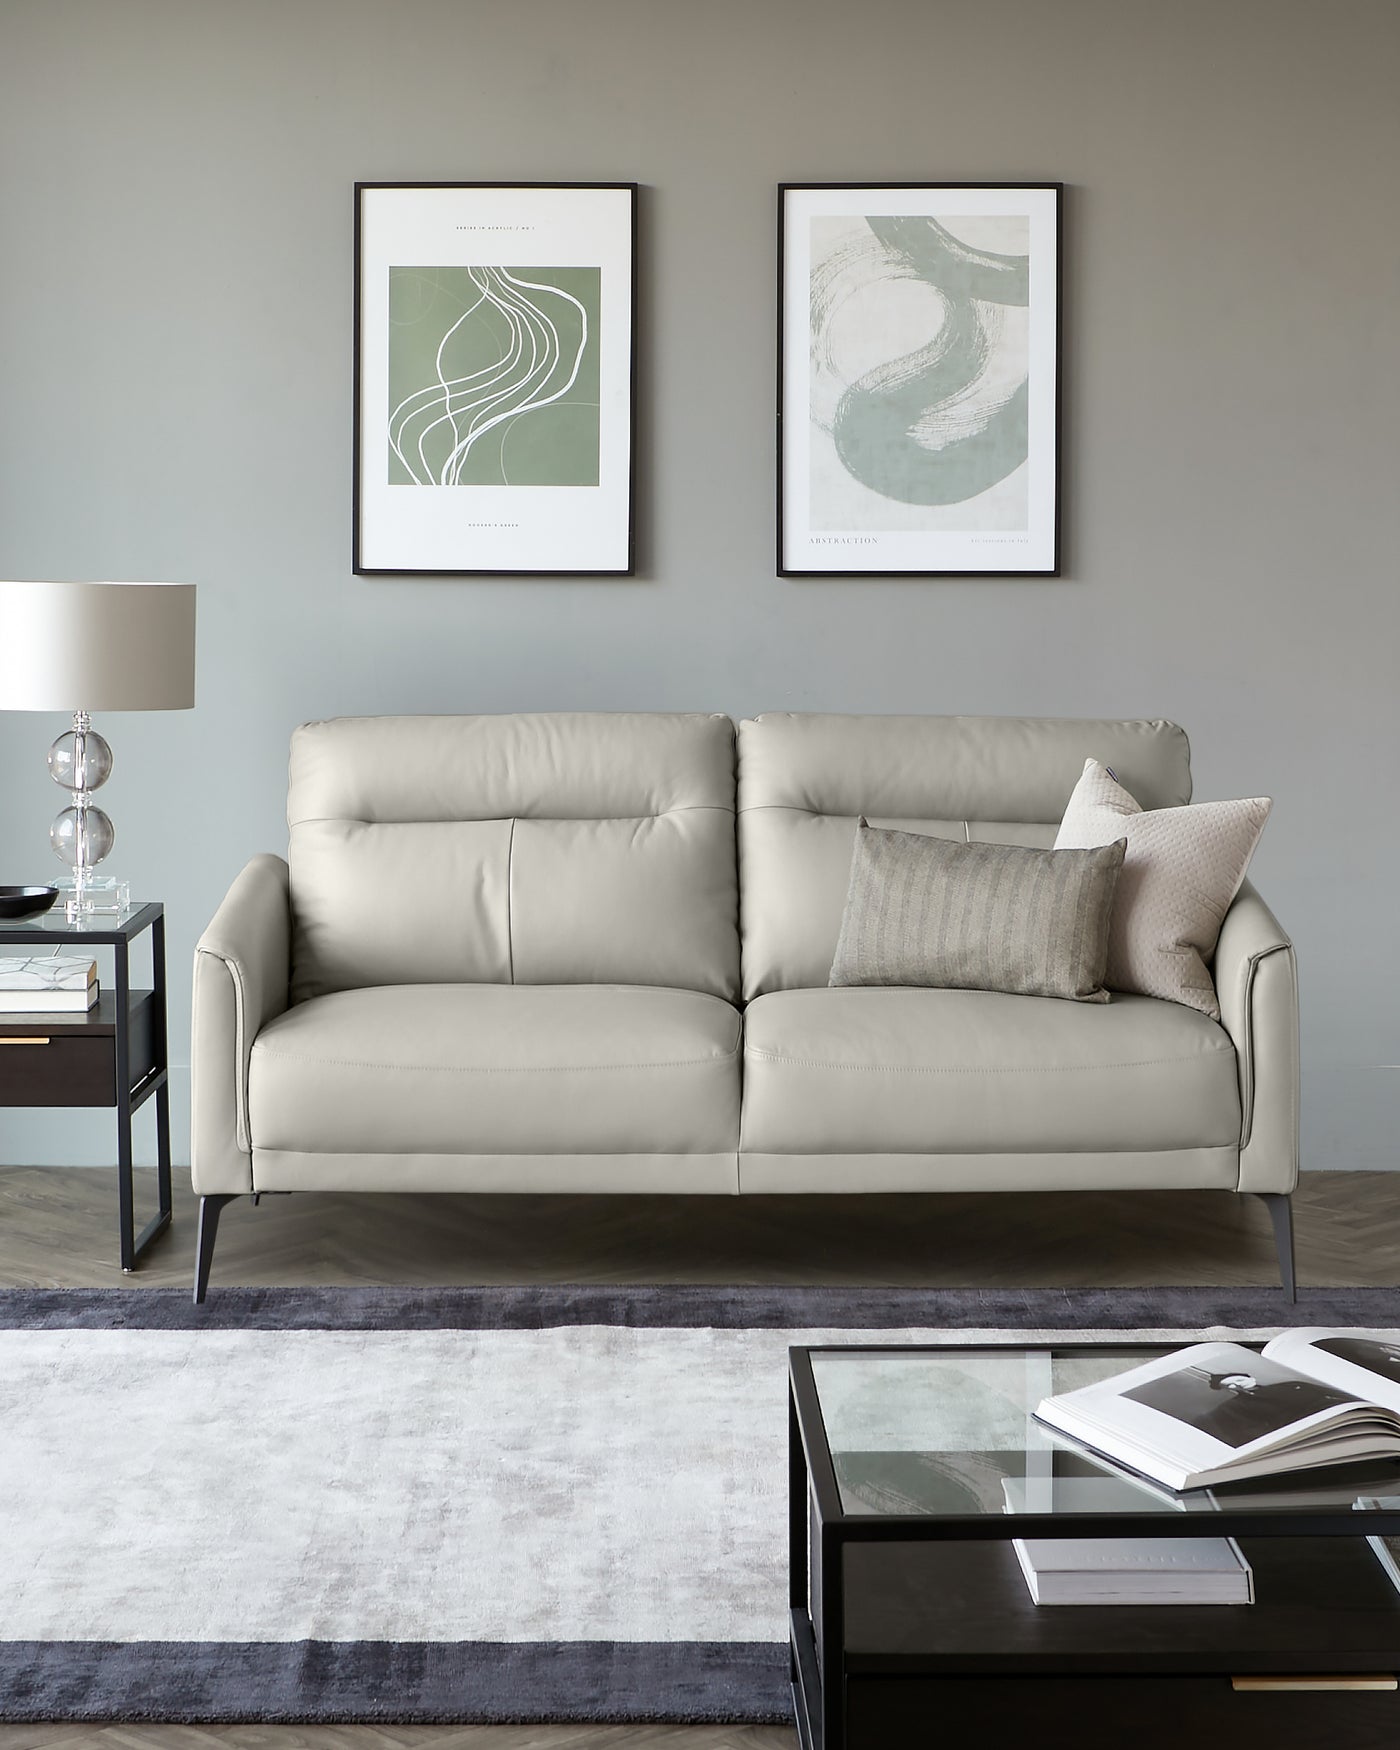 A modern three-seater sofa with light grey upholstery and sleek black metal legs. The sofa is accessorized with two textured decorative pillows, one in a coordinating grey tone and the other featuring a subtle pattern. In front of the sofa is a contemporary glass-top coffee table with a glossy black finish and a lower shelf for storage, all set upon a soft, faded grey area rug with dark border accents.